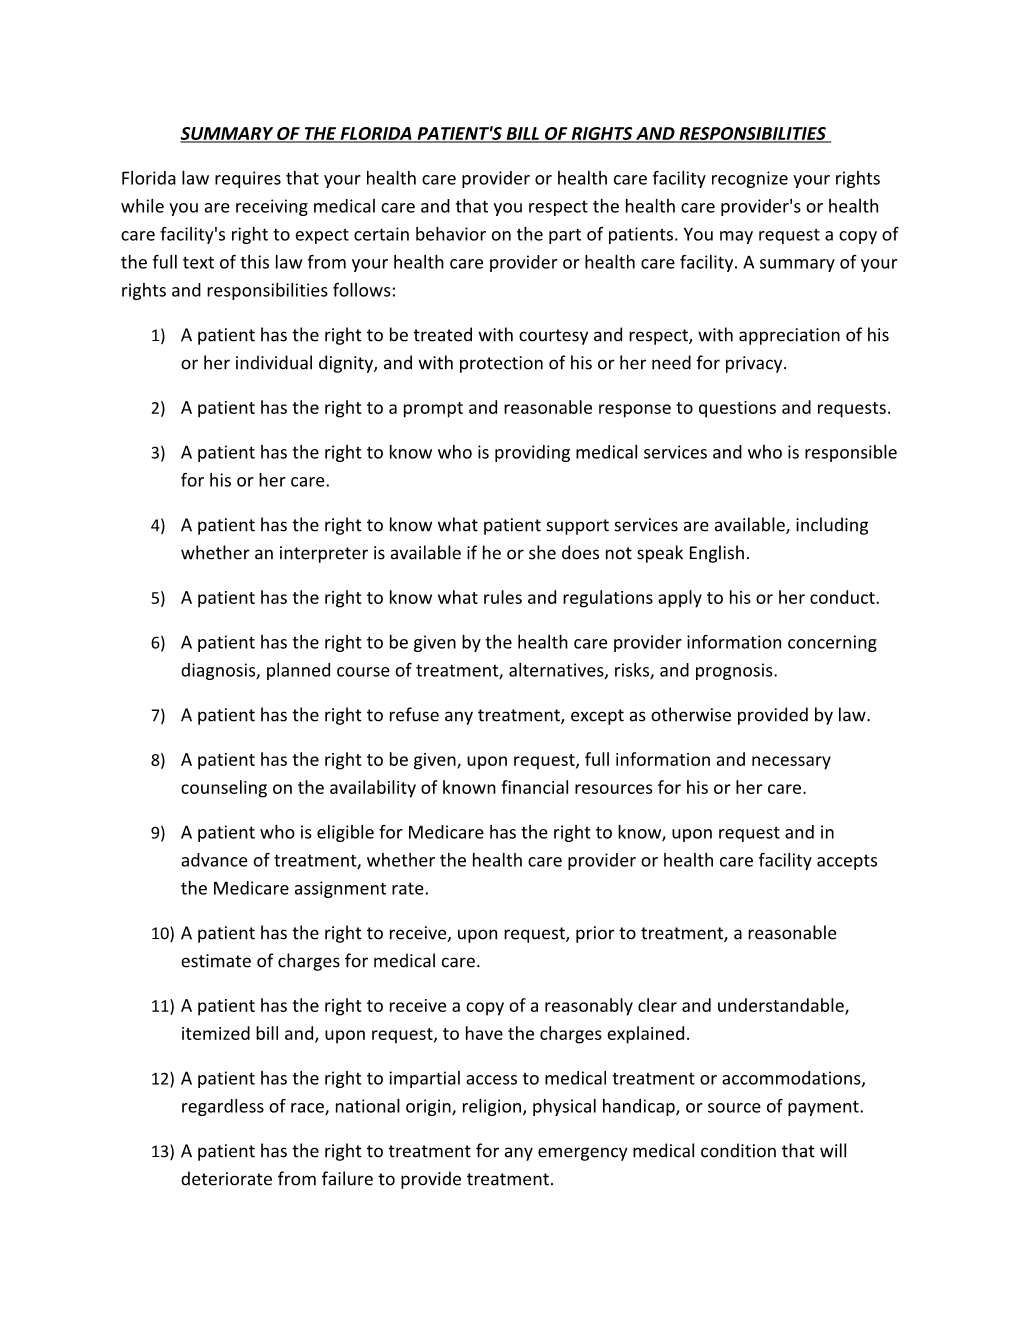 Summary of the Florida Patient's Bill of Rights and Responsibilities